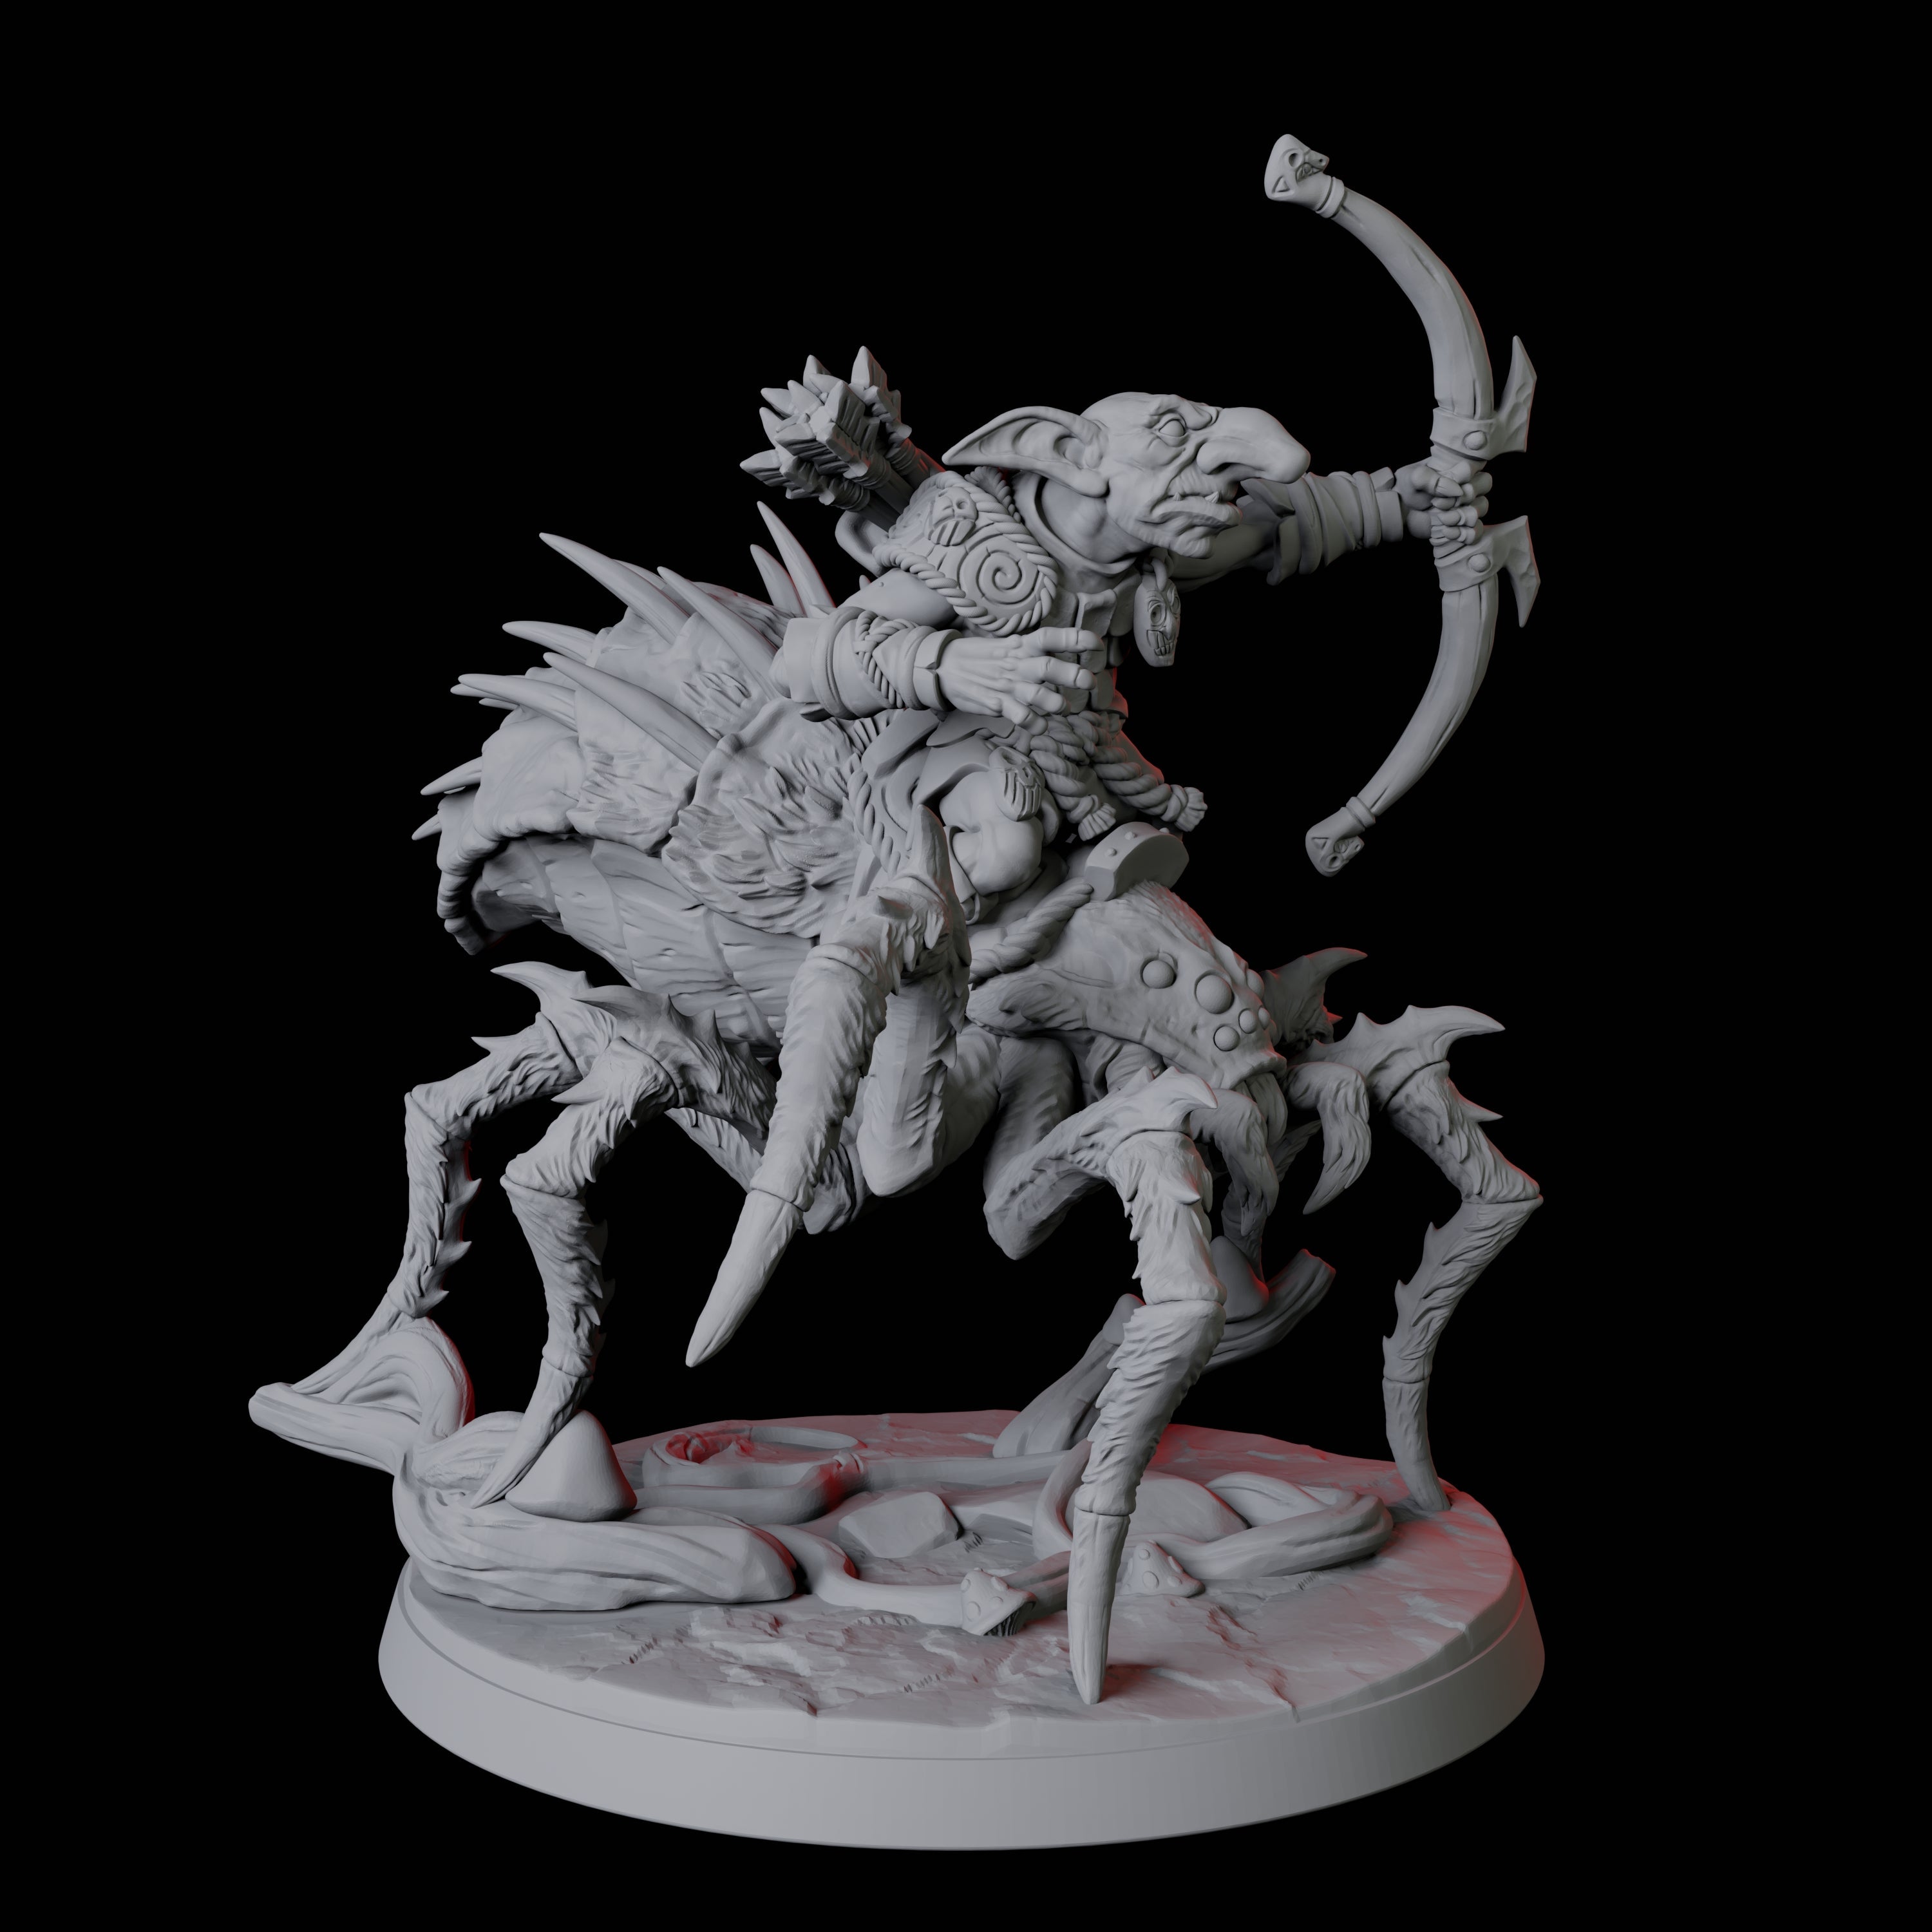 Four Spider Mounted Goblin Riders Miniature for Dungeons and Dragons, Pathfinder or other TTRPGs